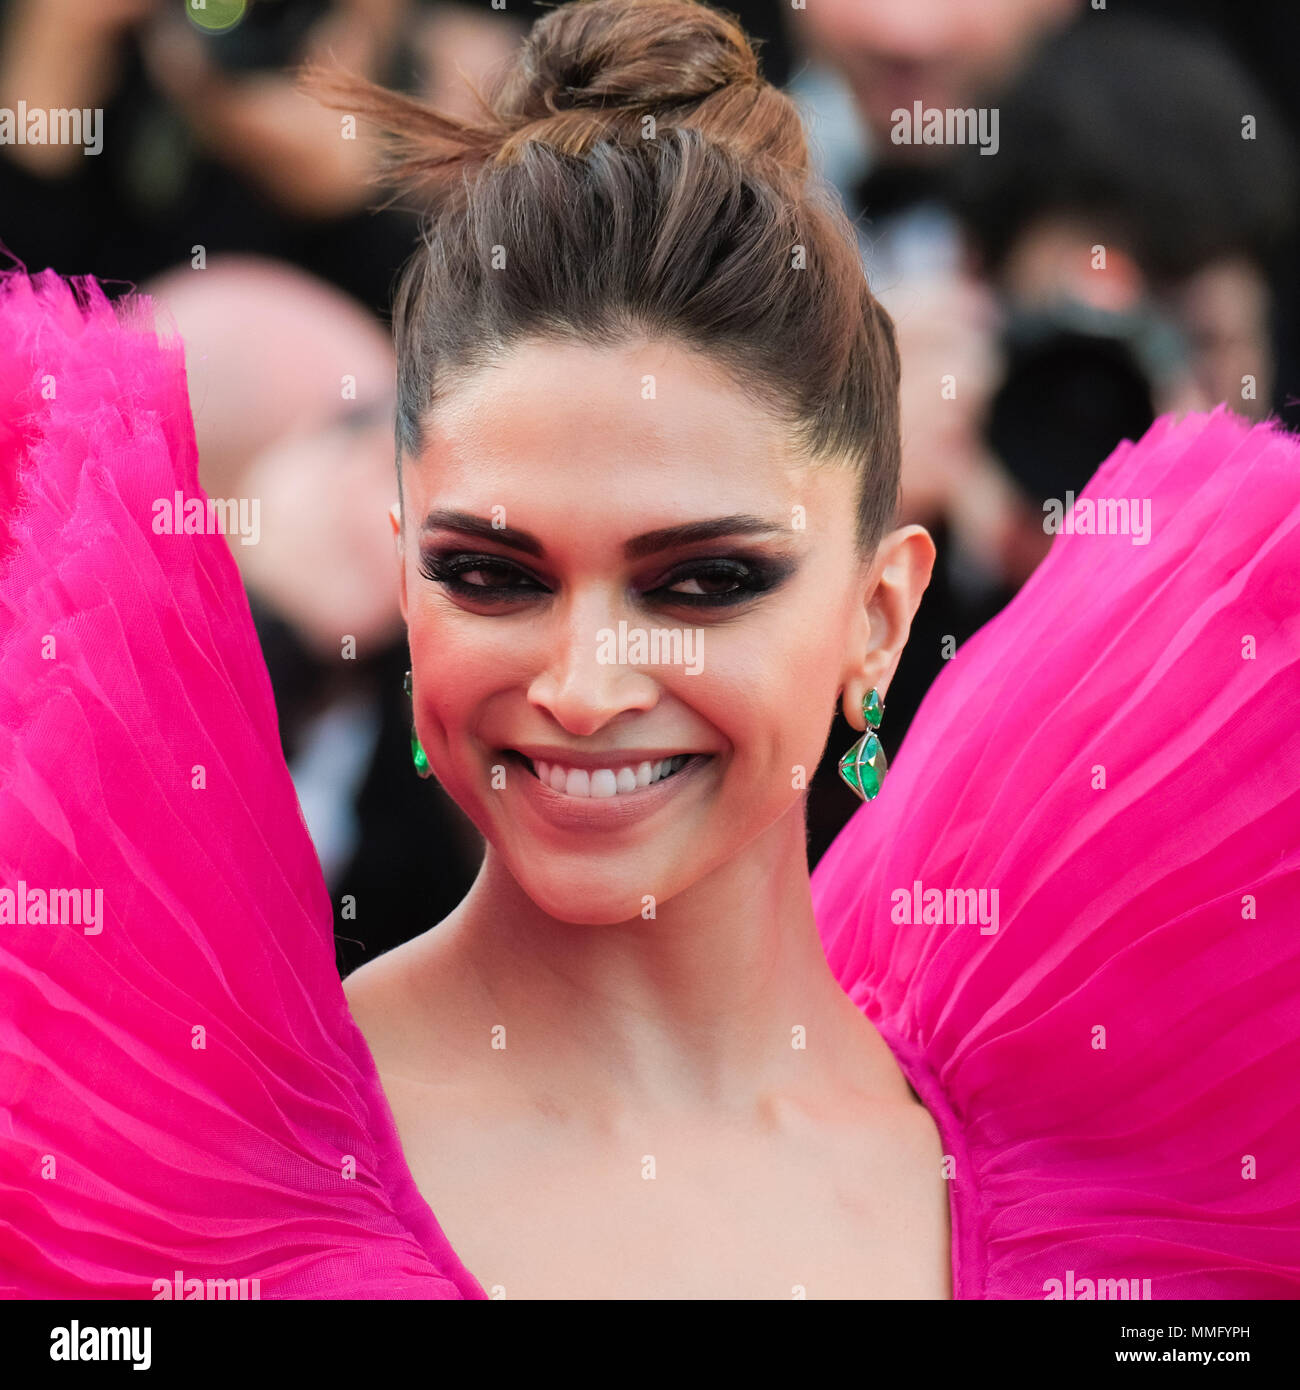 Cannes, France. 11th May 2018. Deepika Padukone on the 'Ash Is Purest White' Red Carpet on Friday 11 May 2018 as part of the 71st International Cannes Film Festival held at Palais des Festivals, Cannes. Pictured: Deepika Padukone. Picture by Julie Edwards. Credit: Julie Edwards/Alamy Live News Stock Photo